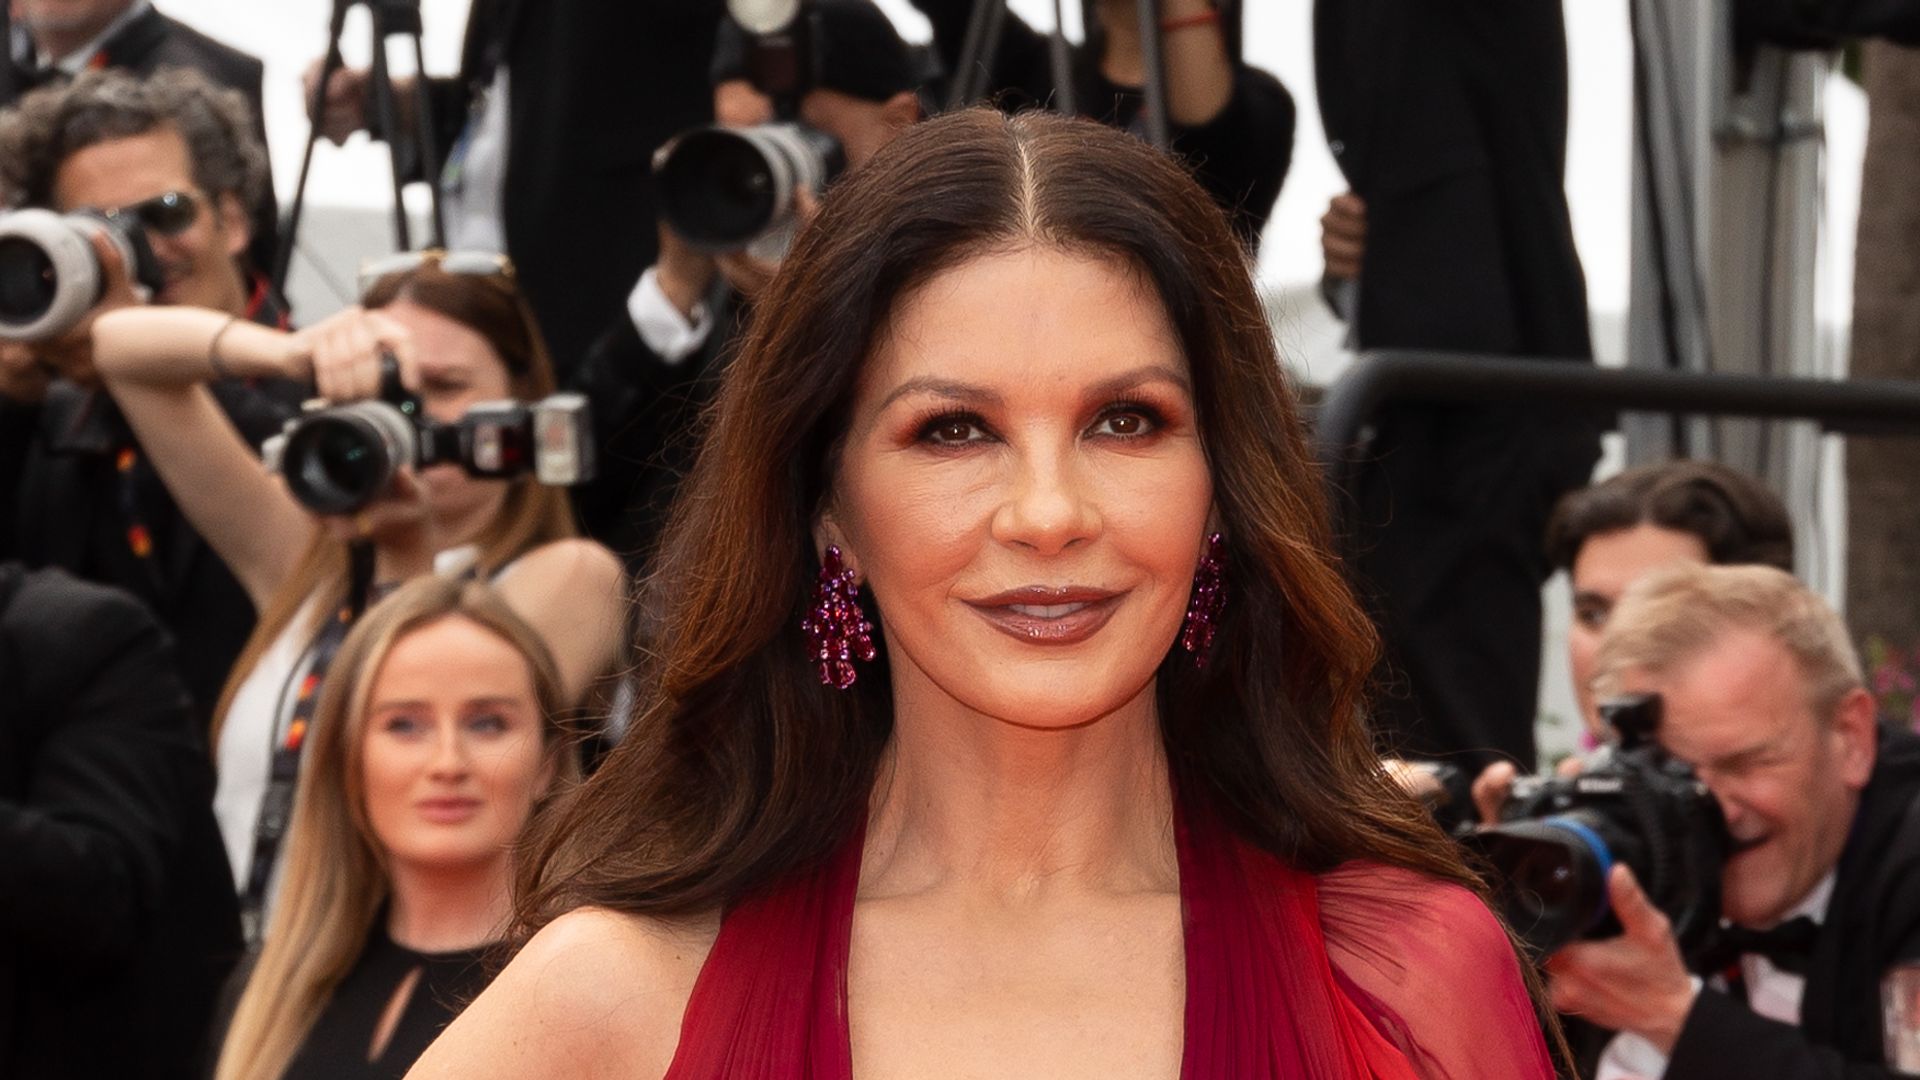 Catherine Zeta-Jones attends the "Jeanne du Barry" Screening & opening ceremony red carpet at the 76th annual Cannes film festival at Palais des Festivals on May 16, 2023 in Cannes, France.